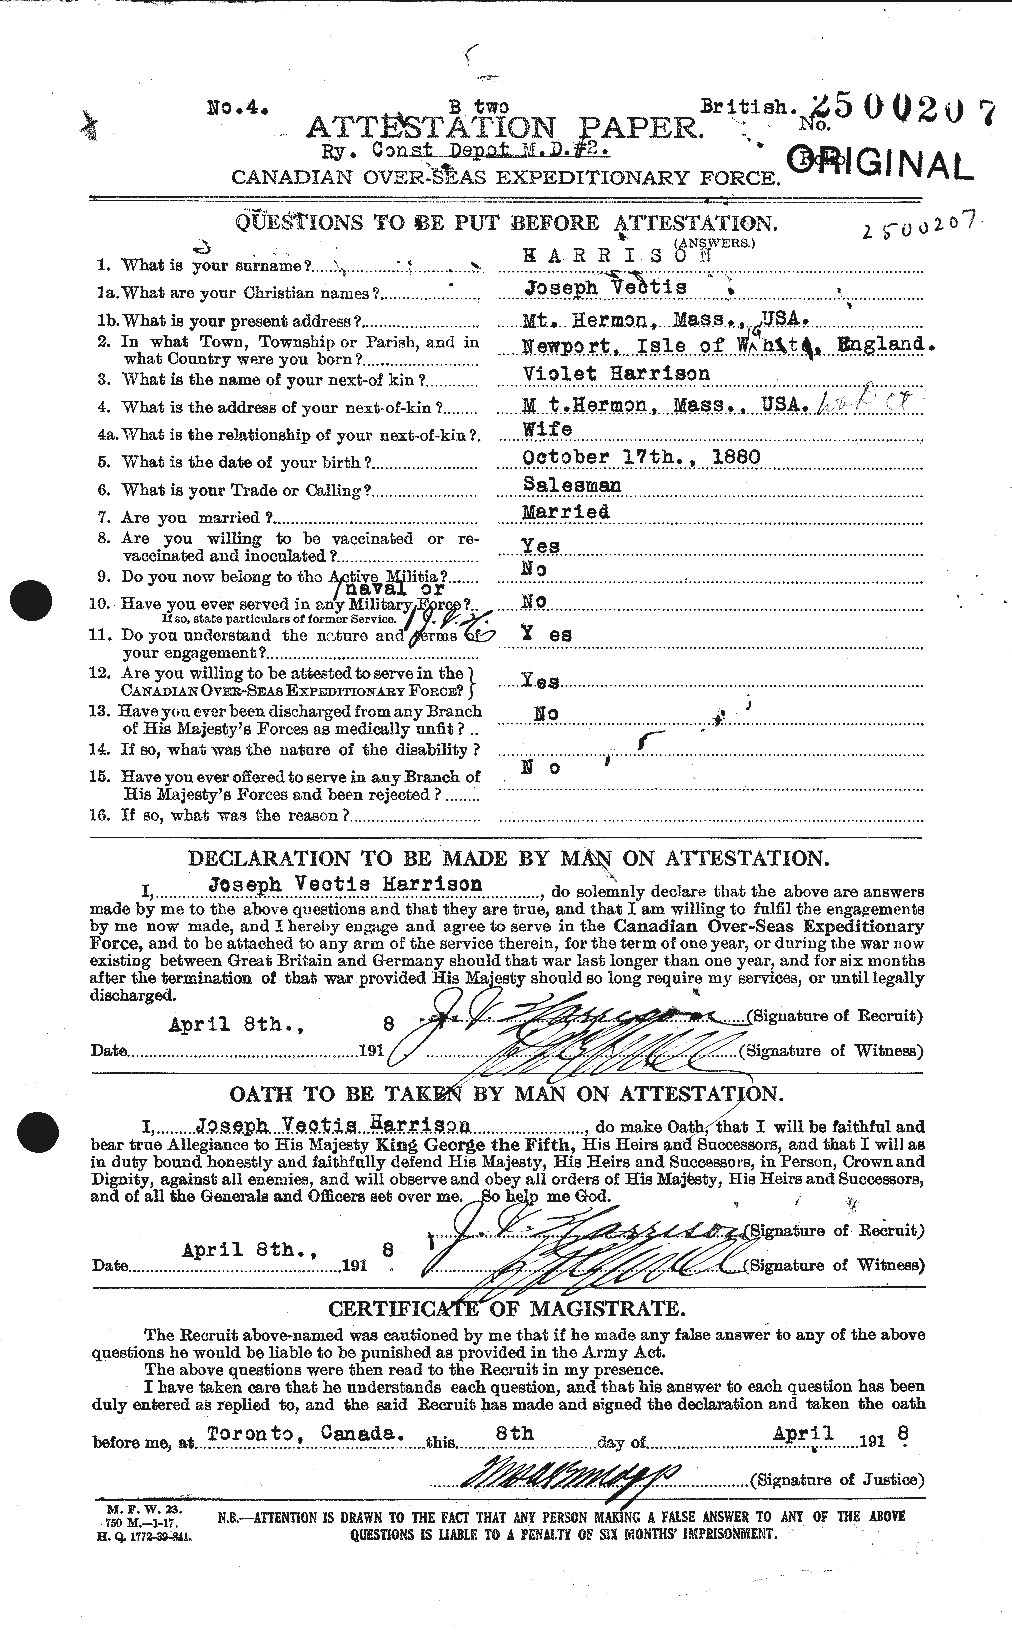 Personnel Records of the First World War - CEF 377553a